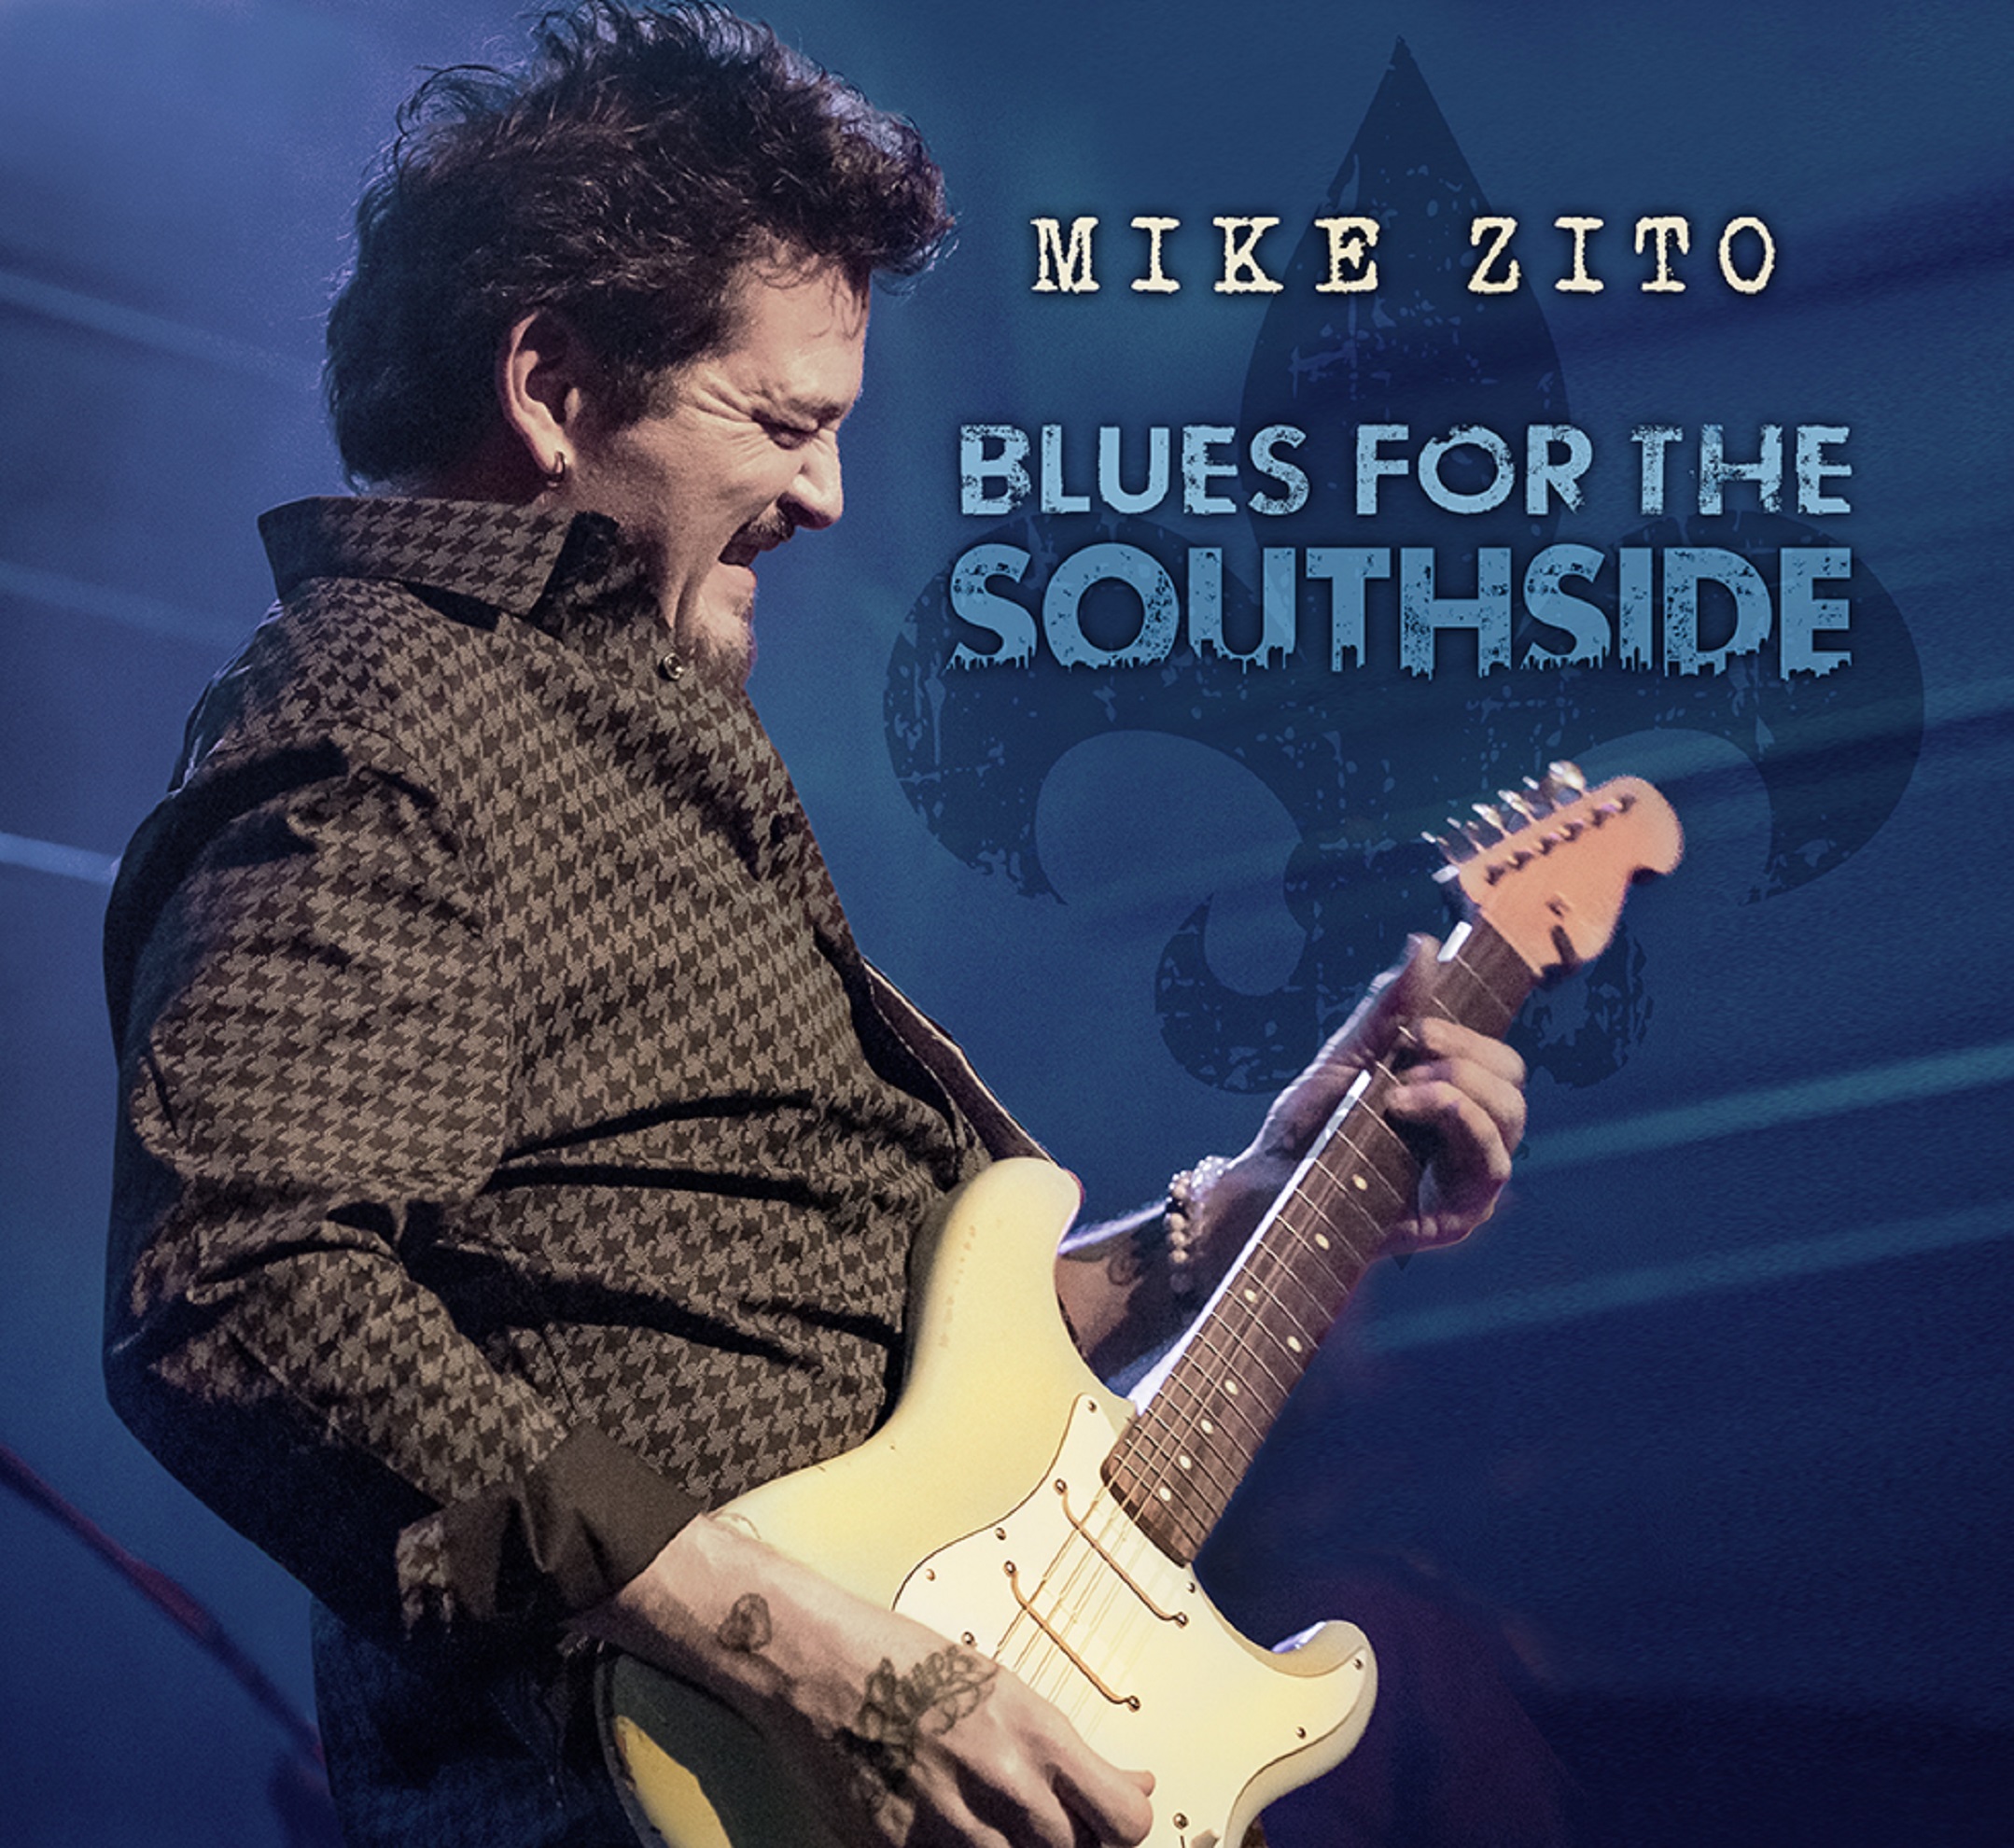 Mike Zito Blasts Off with New Double Live CD Set Recorded in St. Louis, "Blues for the Southside"